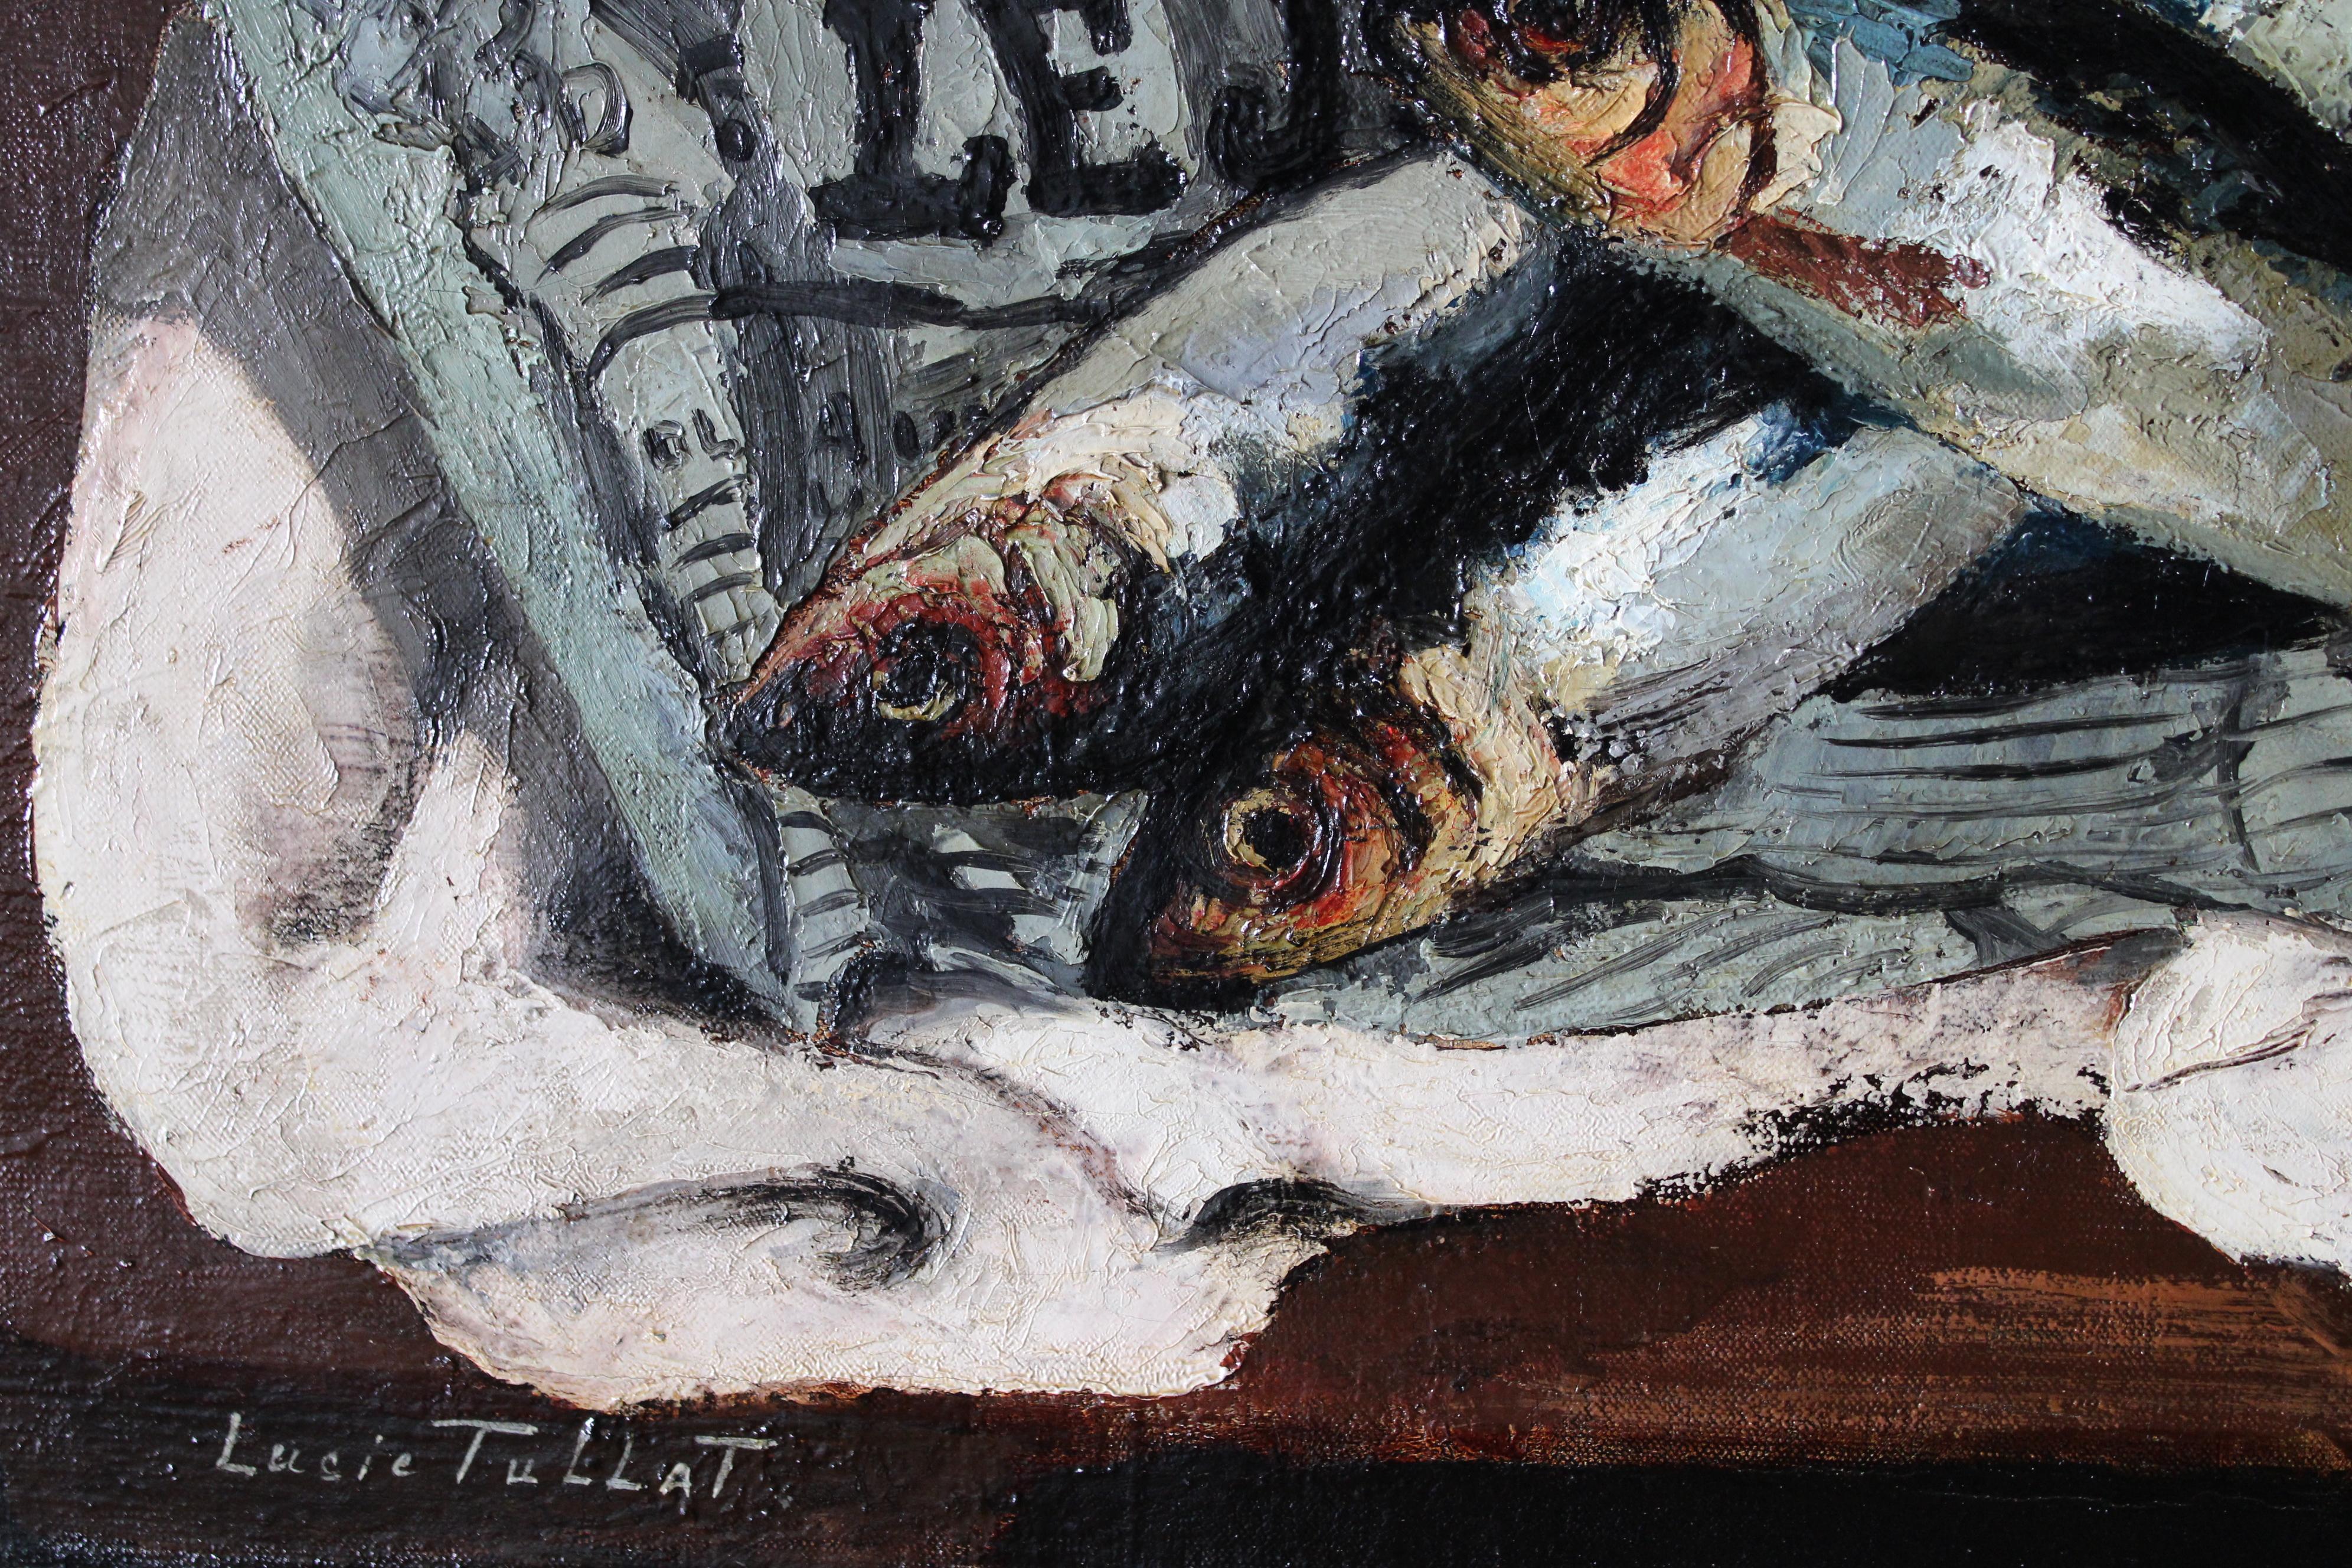 Rare vintage oil painting of sardines on French newspaper by French artist Lucie Tullat (1895-1984).  A chiaroscuro painting, where the darkness of the background focuses your eye on the detailing of the fish in the fore which the artist has carved